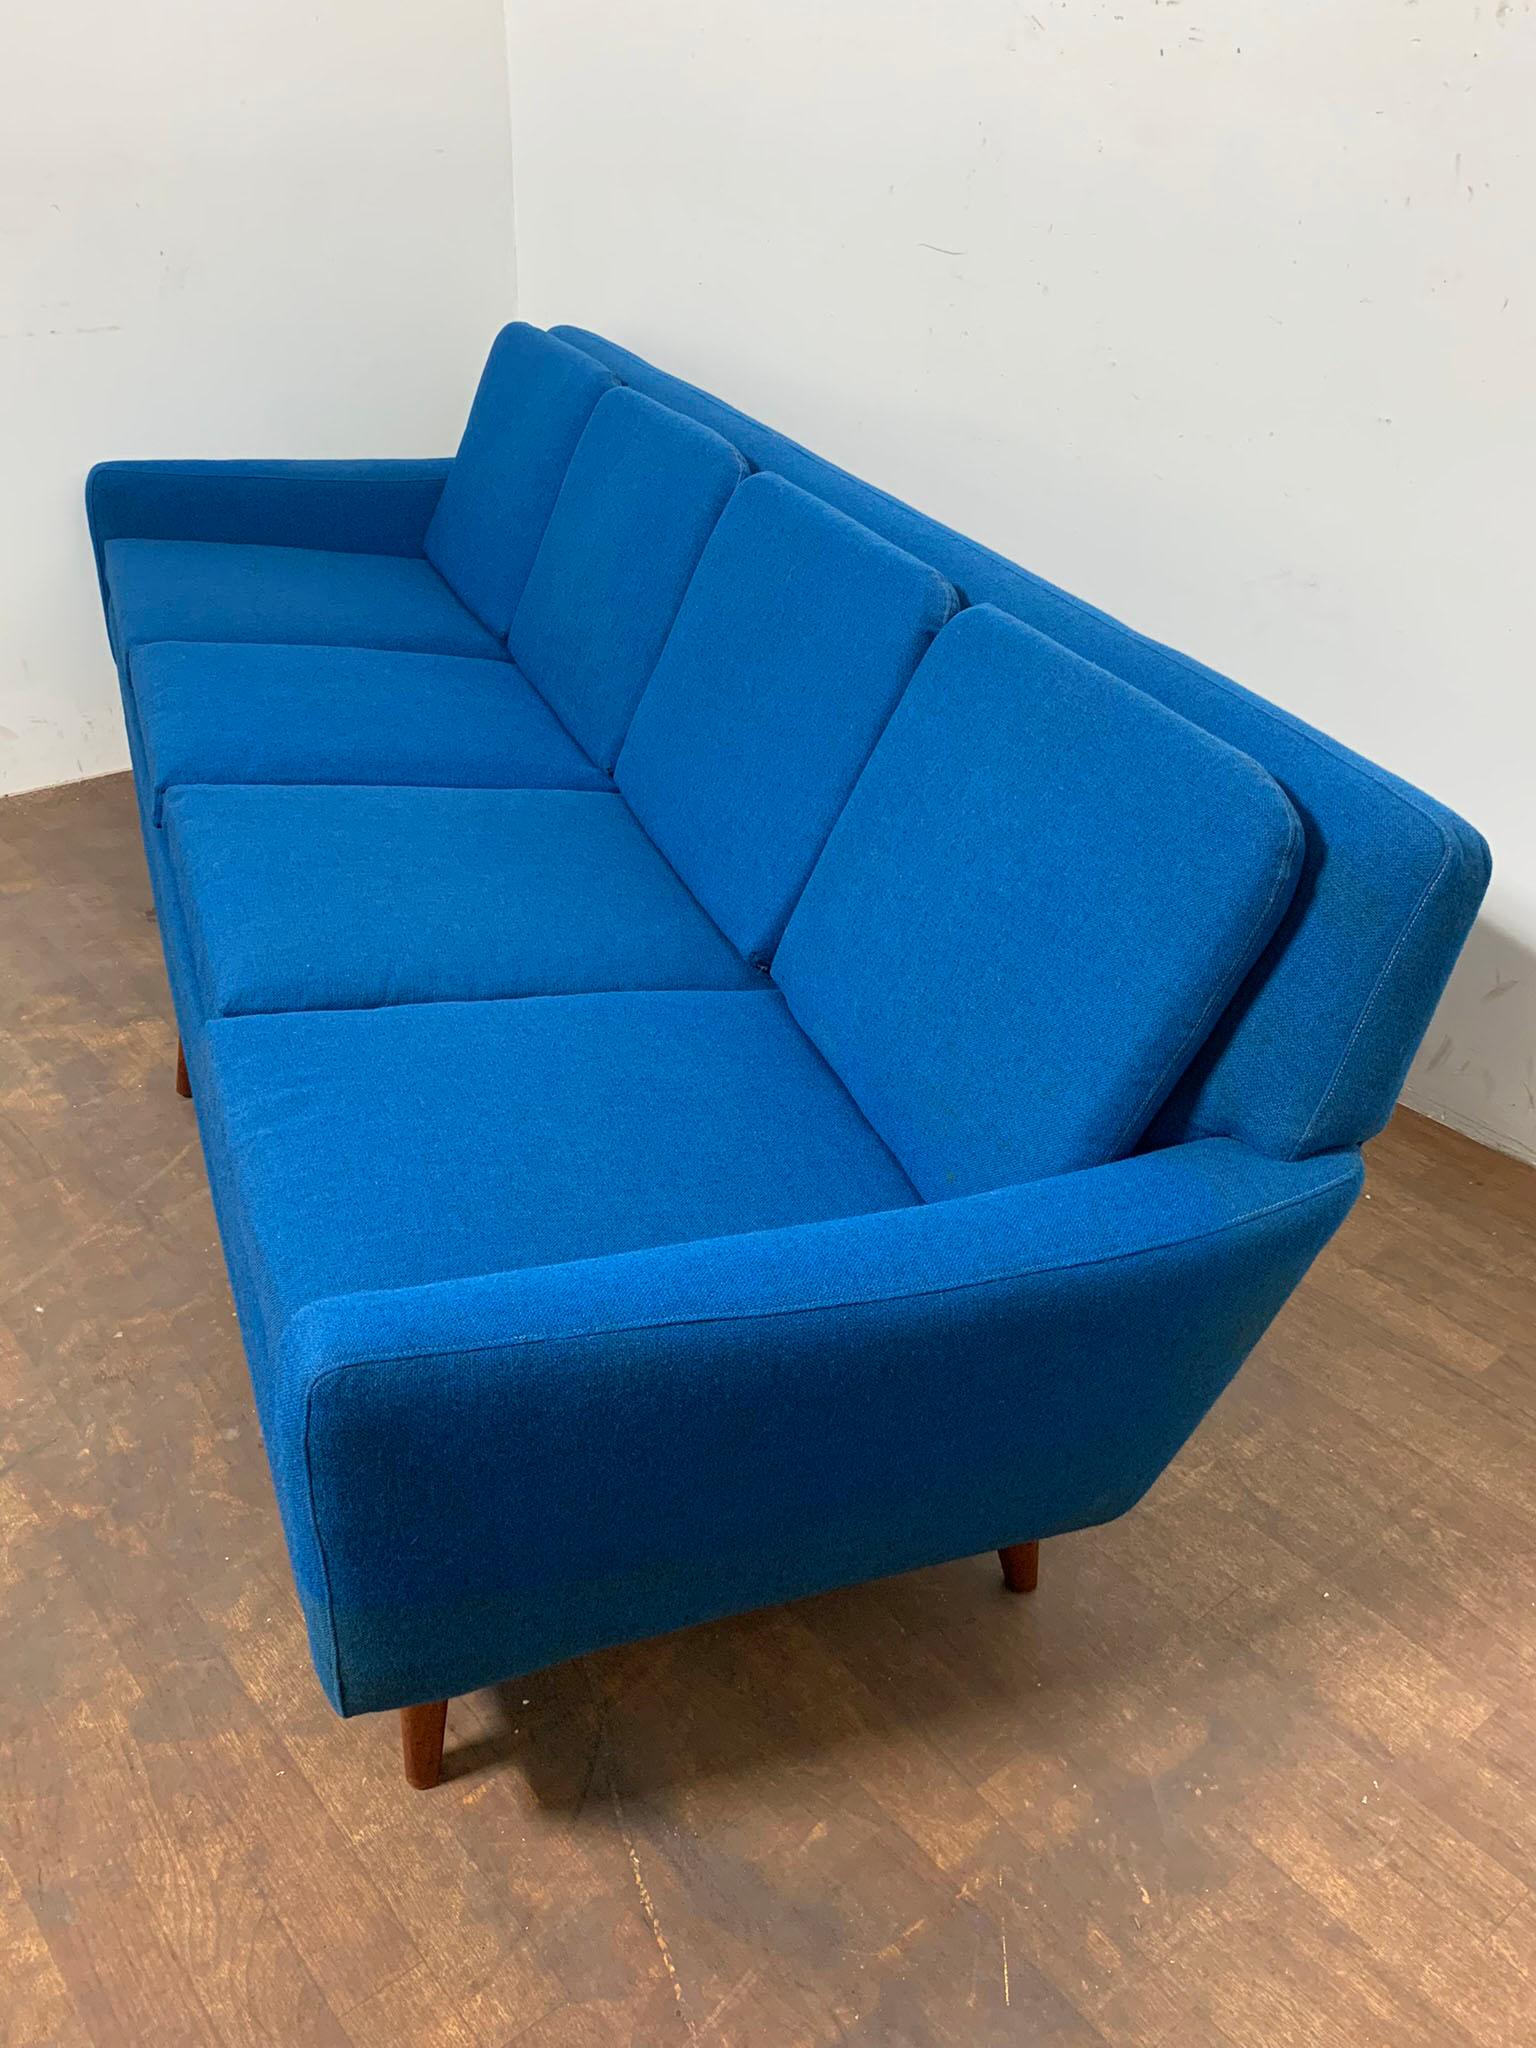 Four seat sofa by Folke Ohlsson for Dux, circa 1960s. As a young Swedish designer, Ohlsson was sent by Dux to California in the early 1950s to establish a factory there to produce furniture for the booming postwar market. Thus, this classic